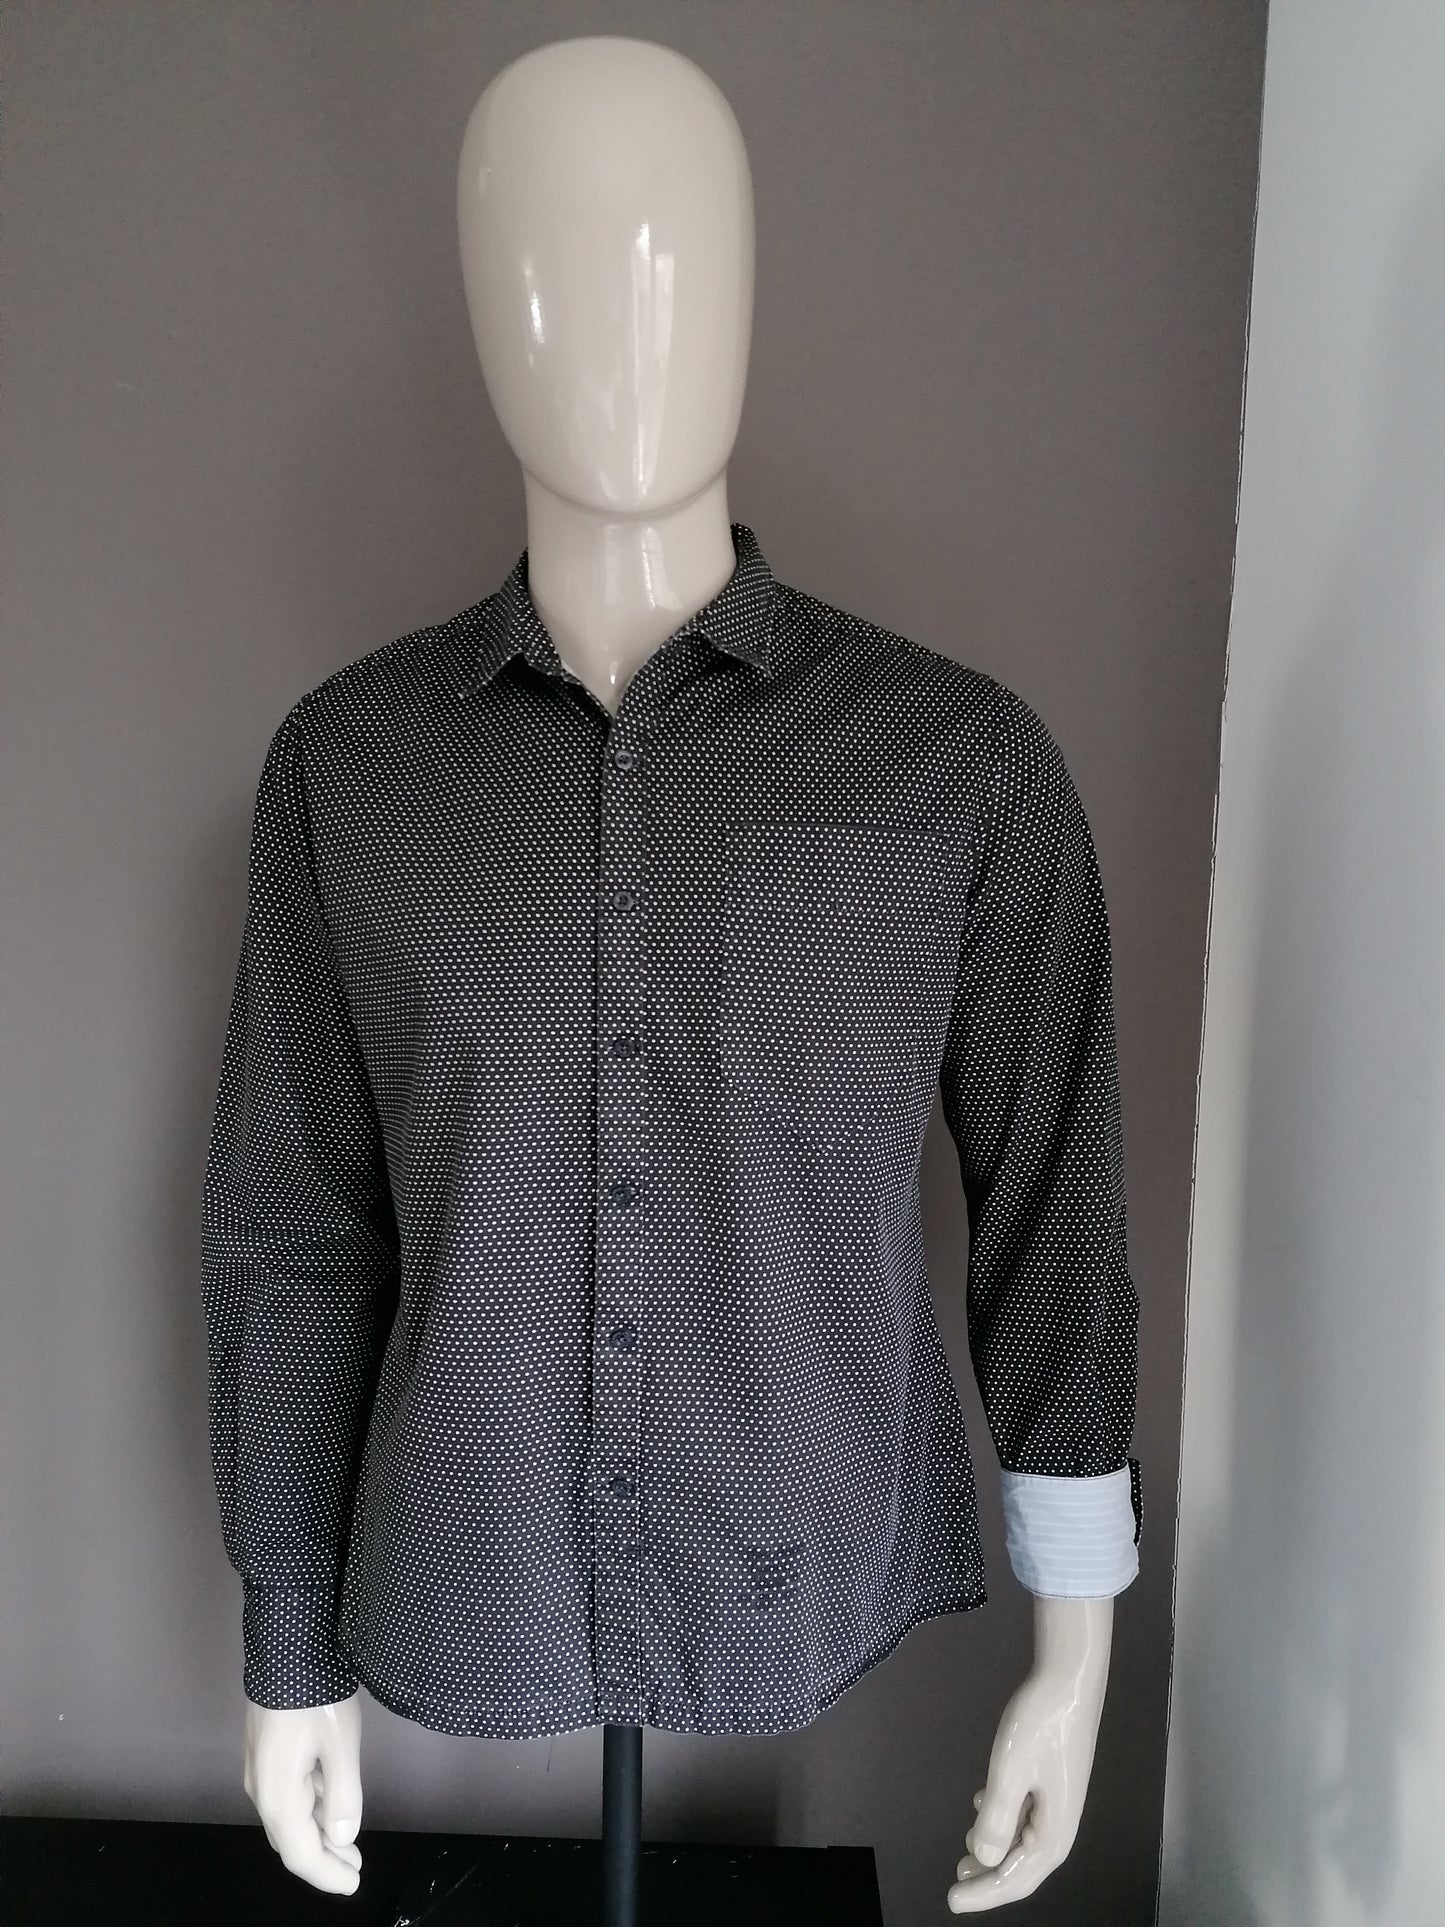 Chemise Pepe Jeans. Points blancs noirs. Taille L.